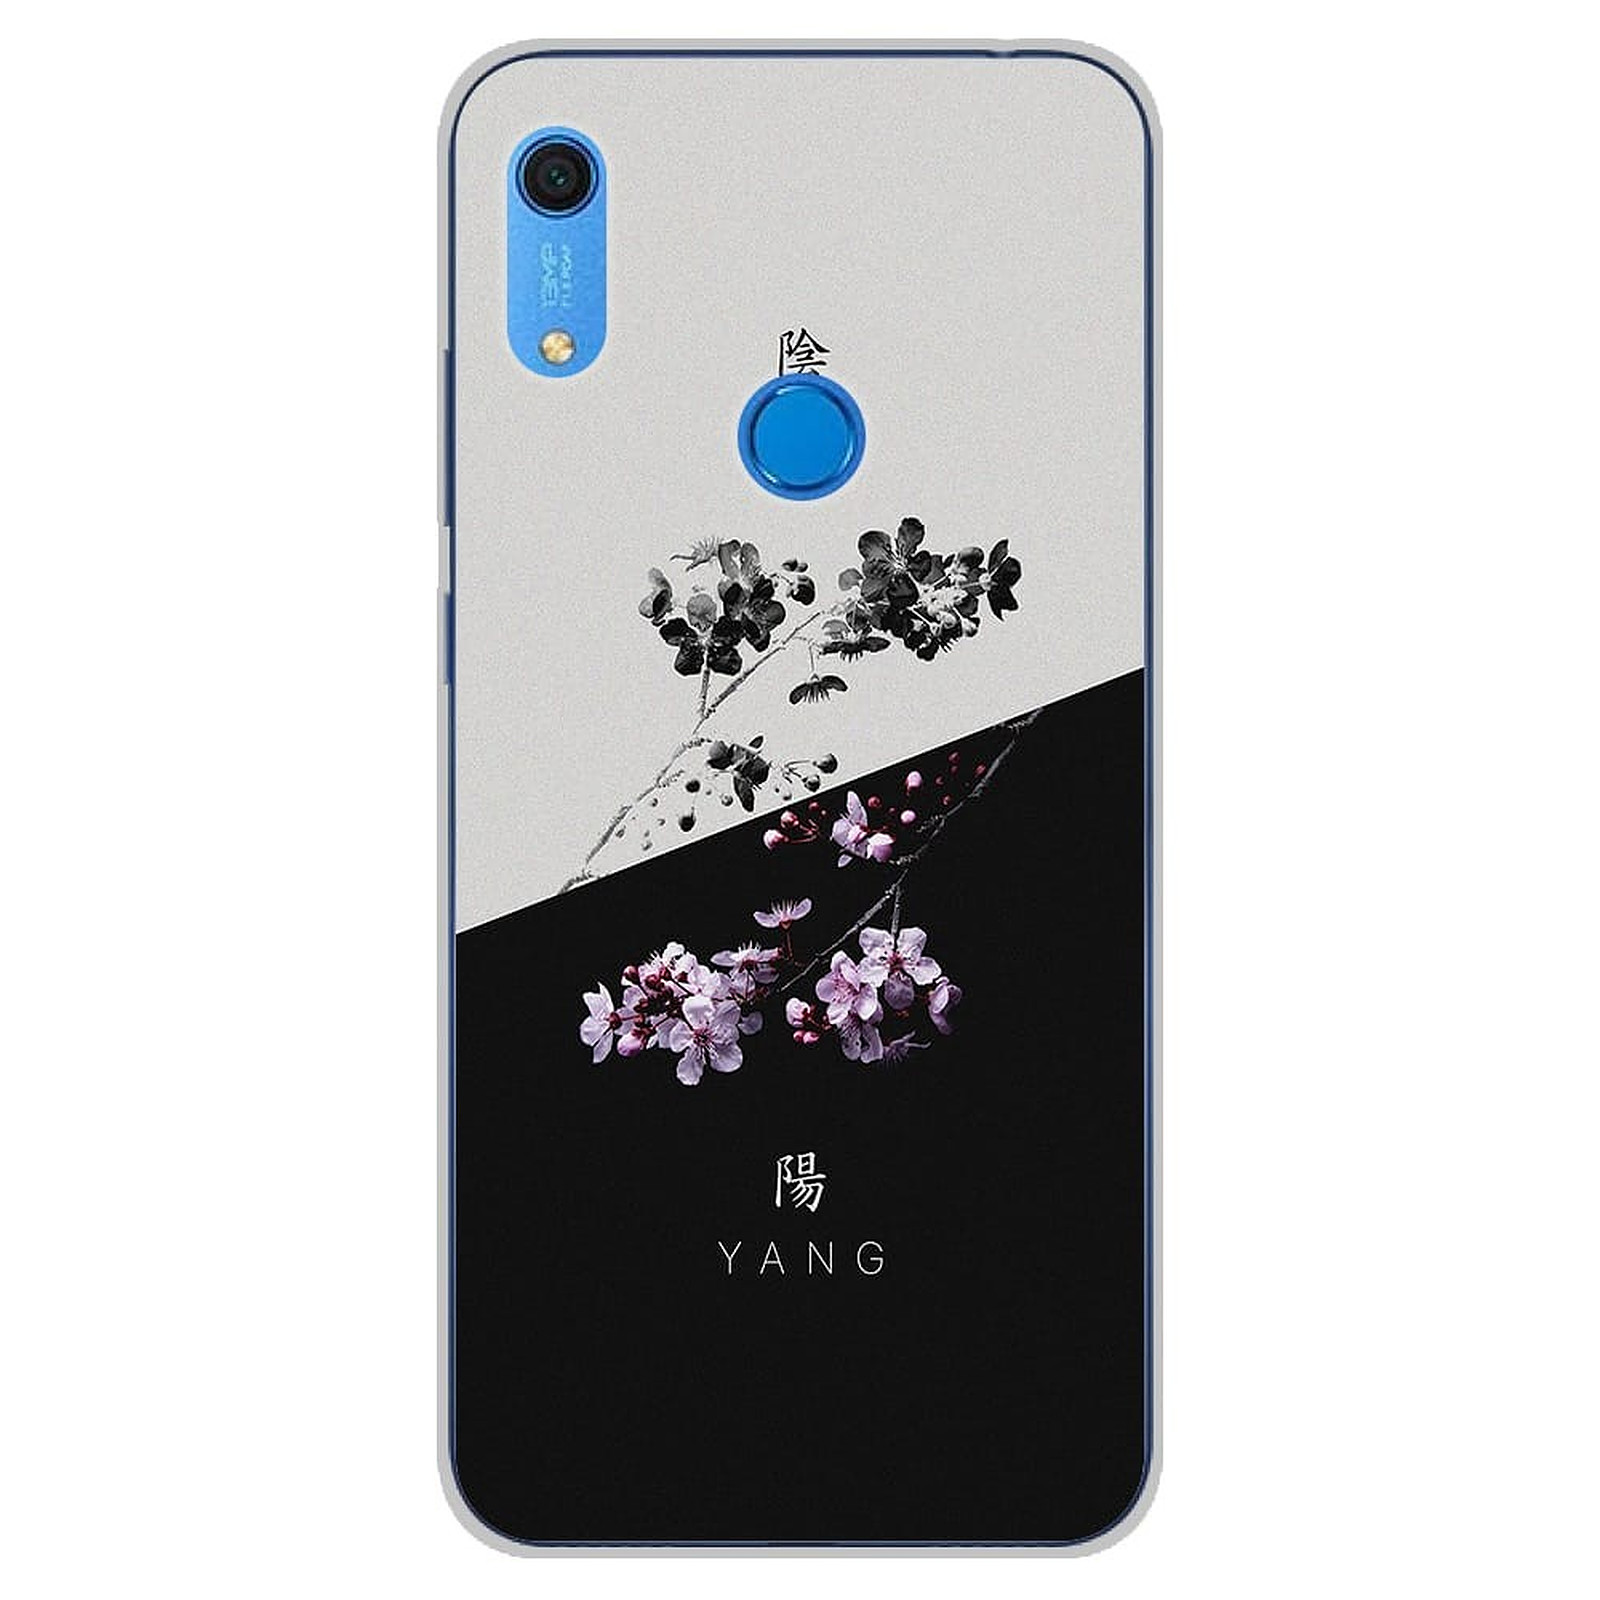 1001 Coques Coque silicone gel Huawei Y6S motif Yin et Yang - Coque telephone 1001Coques